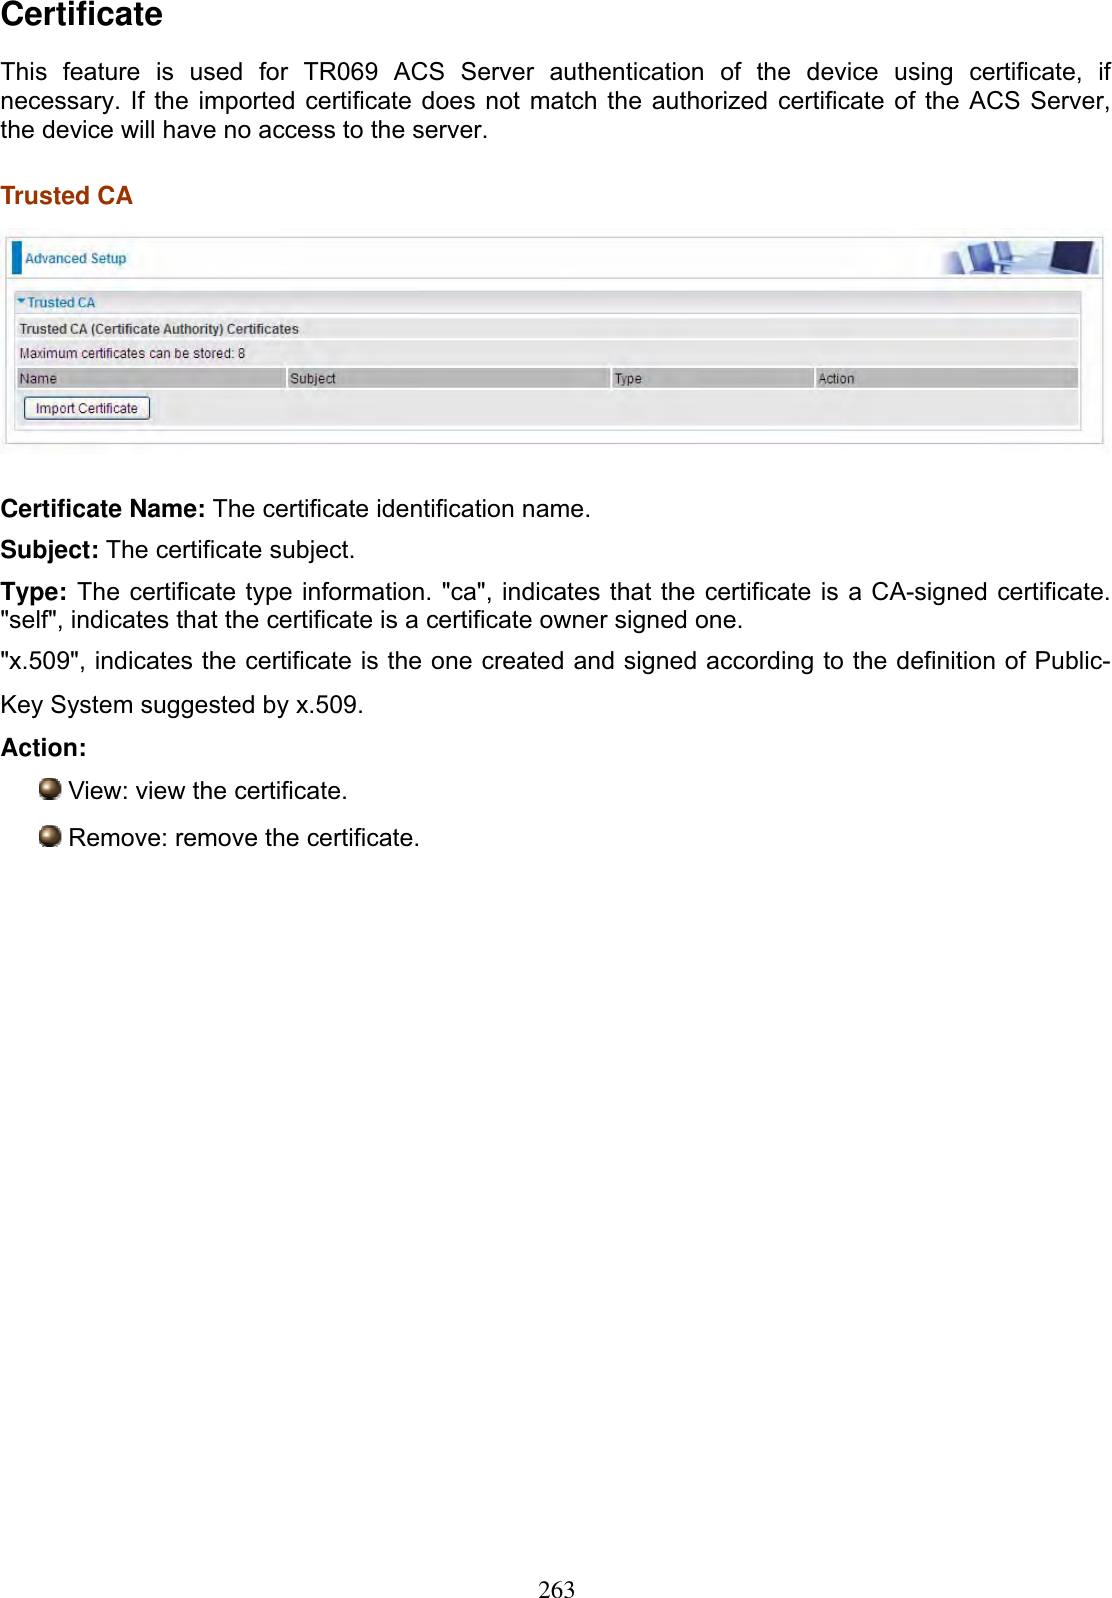 263CertificateThis feature is used for TR069 ACS Server authentication of the device using certificate, if necessary. If the imported certificate does not match the authorized certificate of the ACS Server, the device will have no access to the server. Trusted CA Certificate Name: The certificate identification name. Subject: The certificate subject. Type: The certificate type information. &quot;ca&quot;, indicates that the certificate is a CA-signed certificate. &quot;self&quot;, indicates that the certificate is a certificate owner signed one. &quot;x.509&quot;, indicates the certificate is the one created and signed according to the definition of Public-Key System suggested by x.509. Action:View: view the certificate. Remove: remove the certificate. 